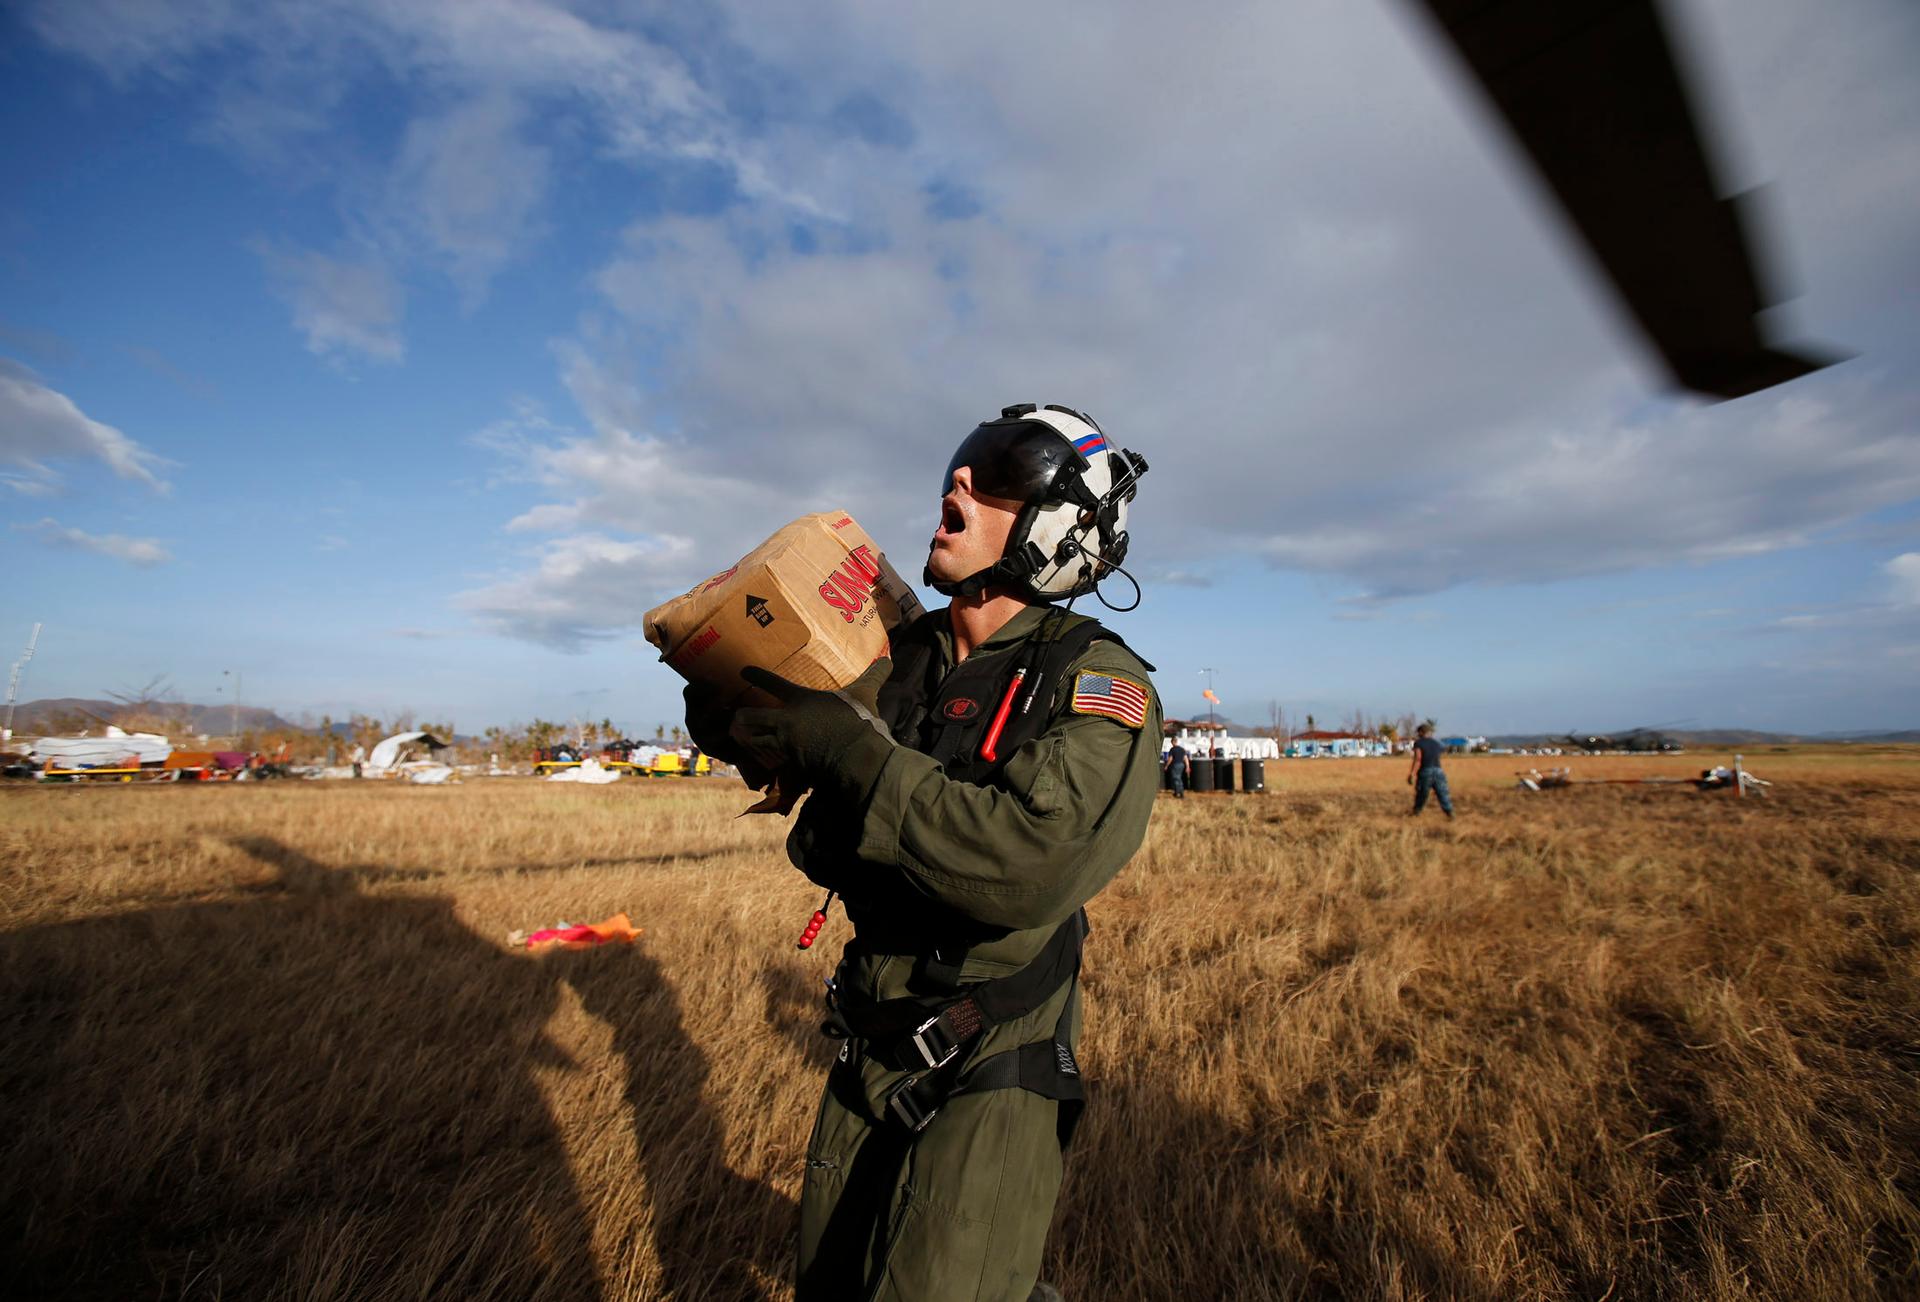 A US Marine takes a gasp of air while loading humanitarian goods into helicopter as part of relief efforts in the Philippines following Super Typhoon Haiyan in 2013.